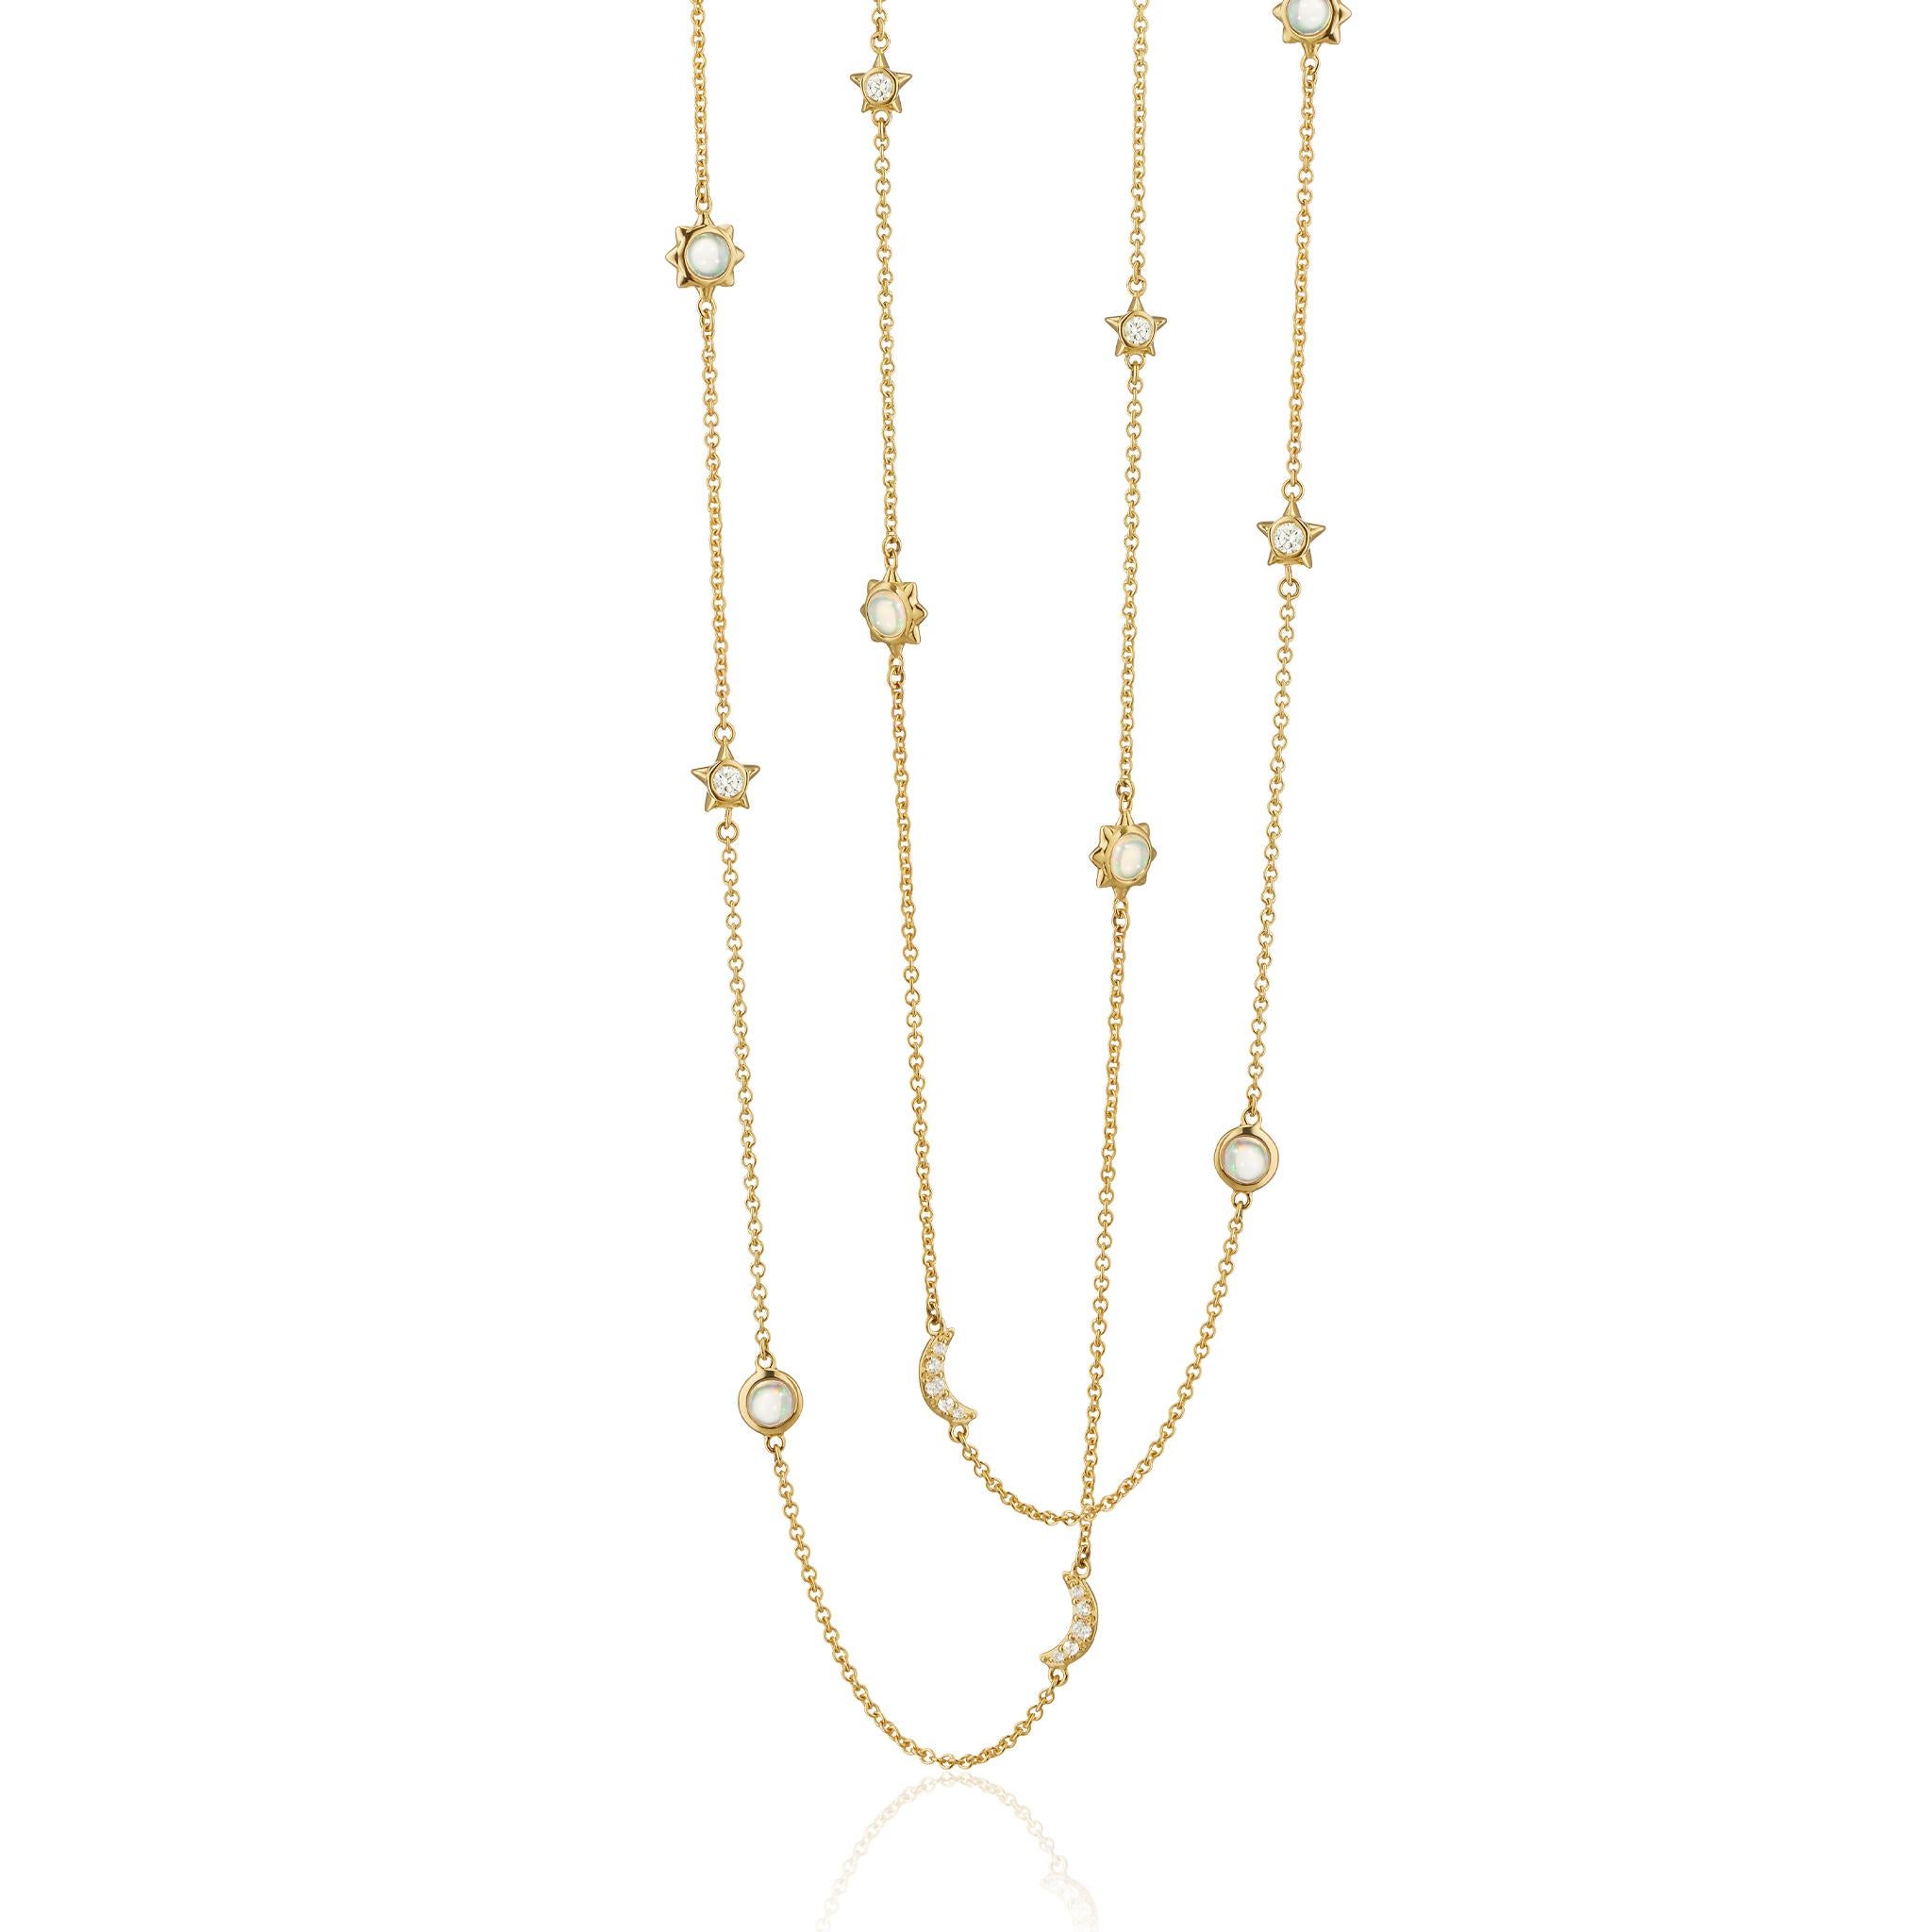 From Monica Rich Kosann's Sun, Moon and Stars Collection, this 18K Gold chain chain necklace inspires the magical quality of space by featuring (5) of the following accents - diamond moons, bezel set crystal opal suns and bezel set diamond stars.